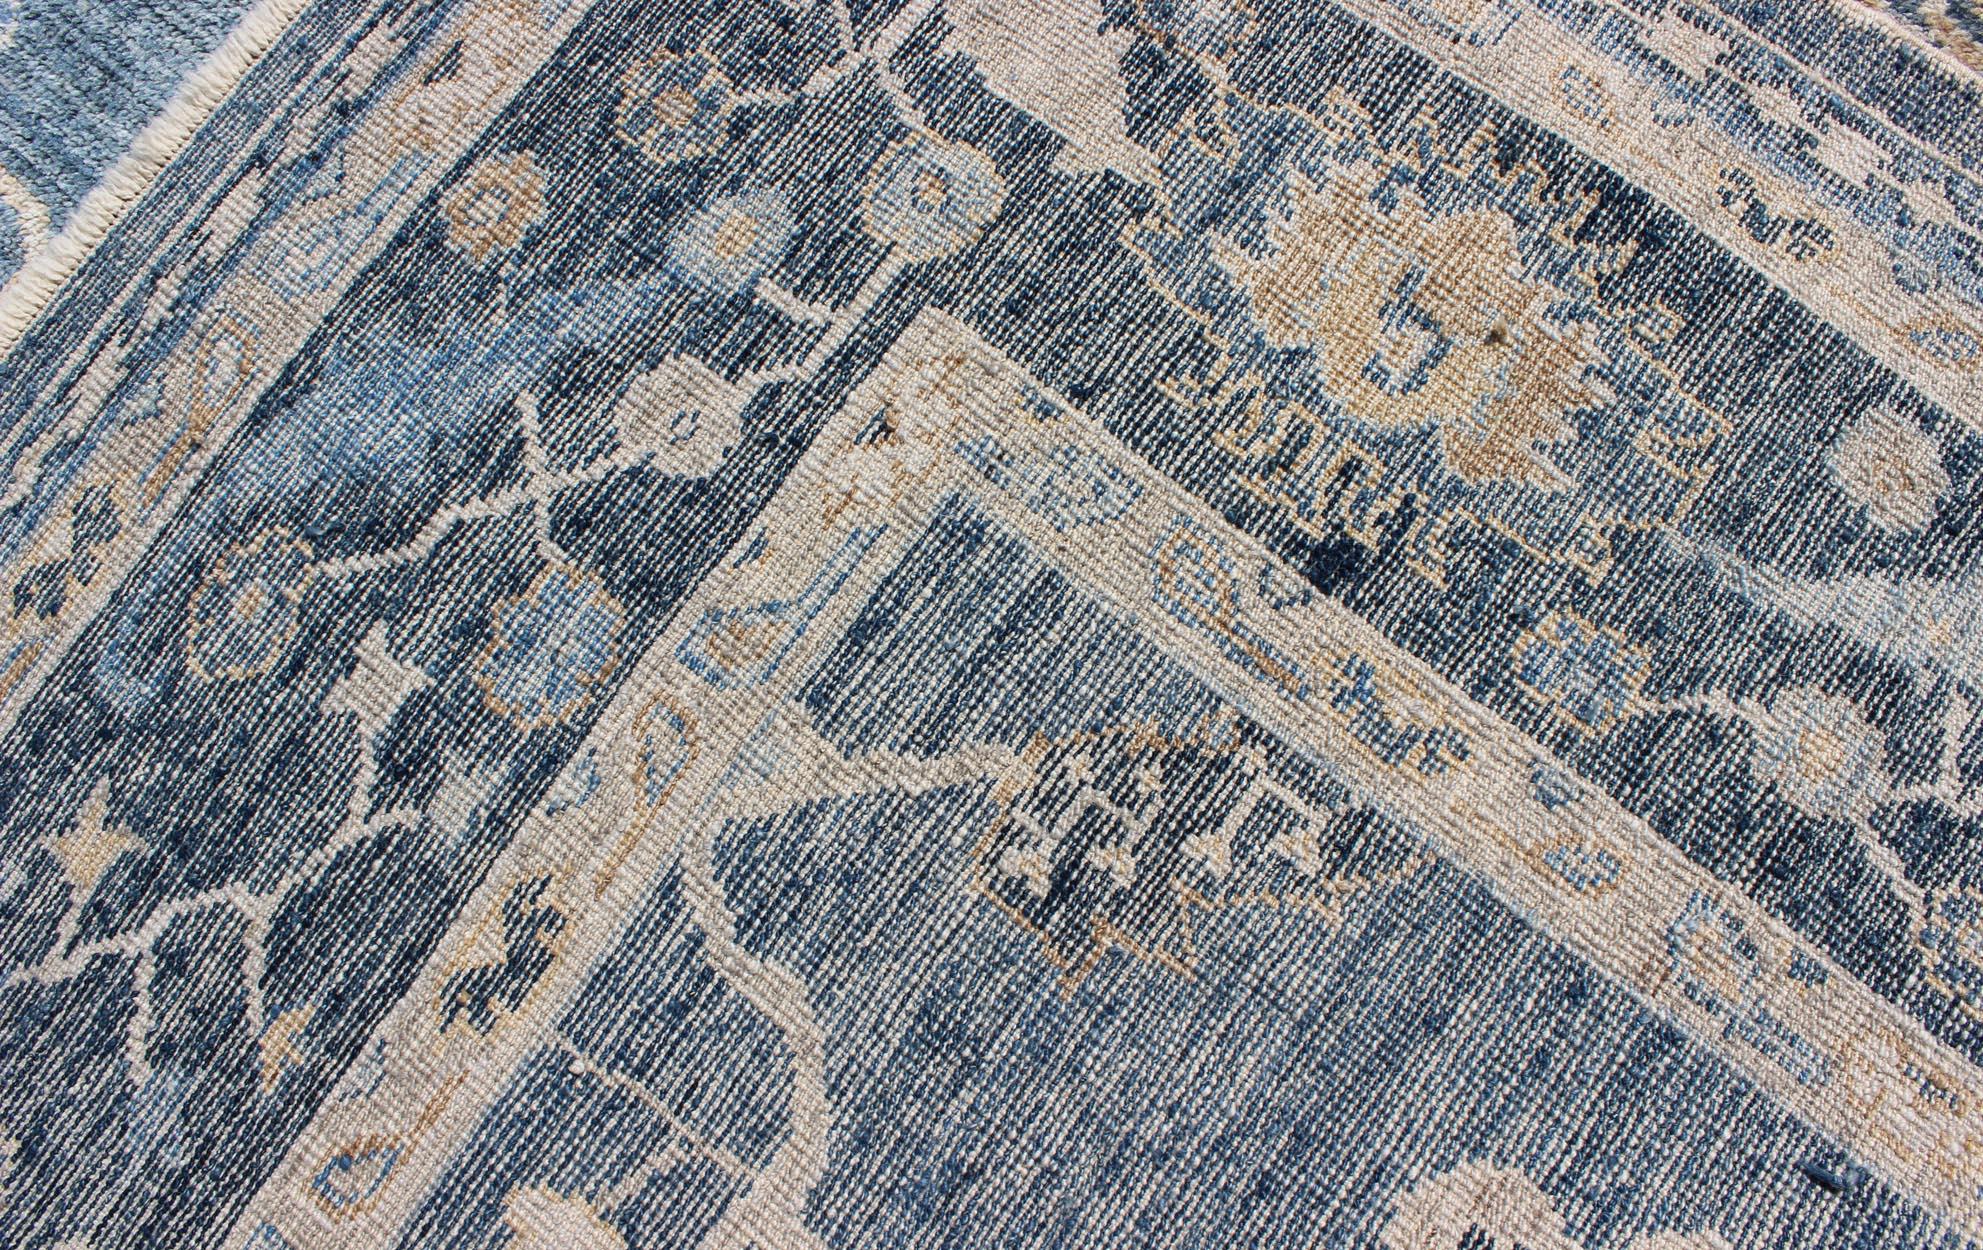 Angora Turkish Oushak Rug in Shades of Blue and Tan 8